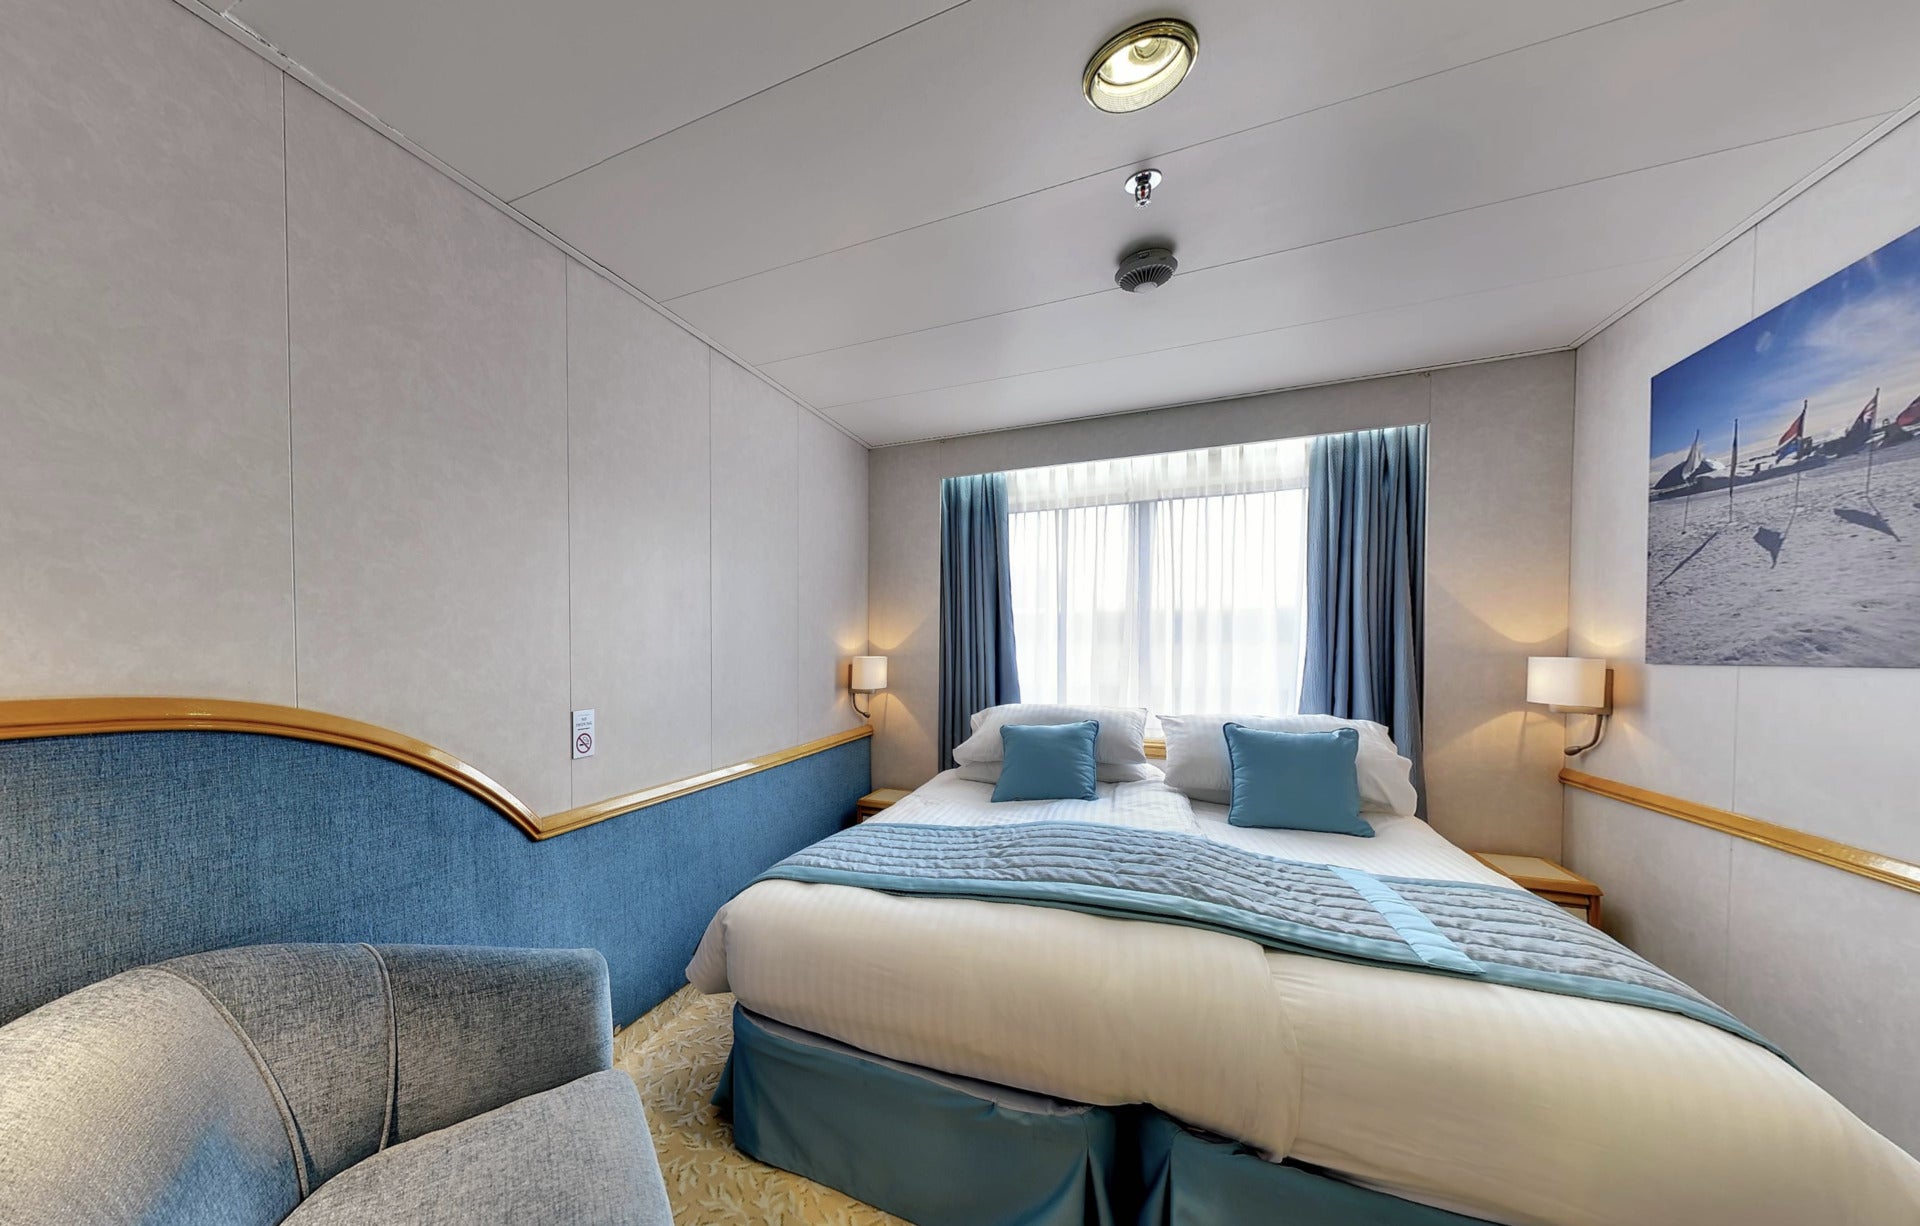 Cabins are available for one or two passengers